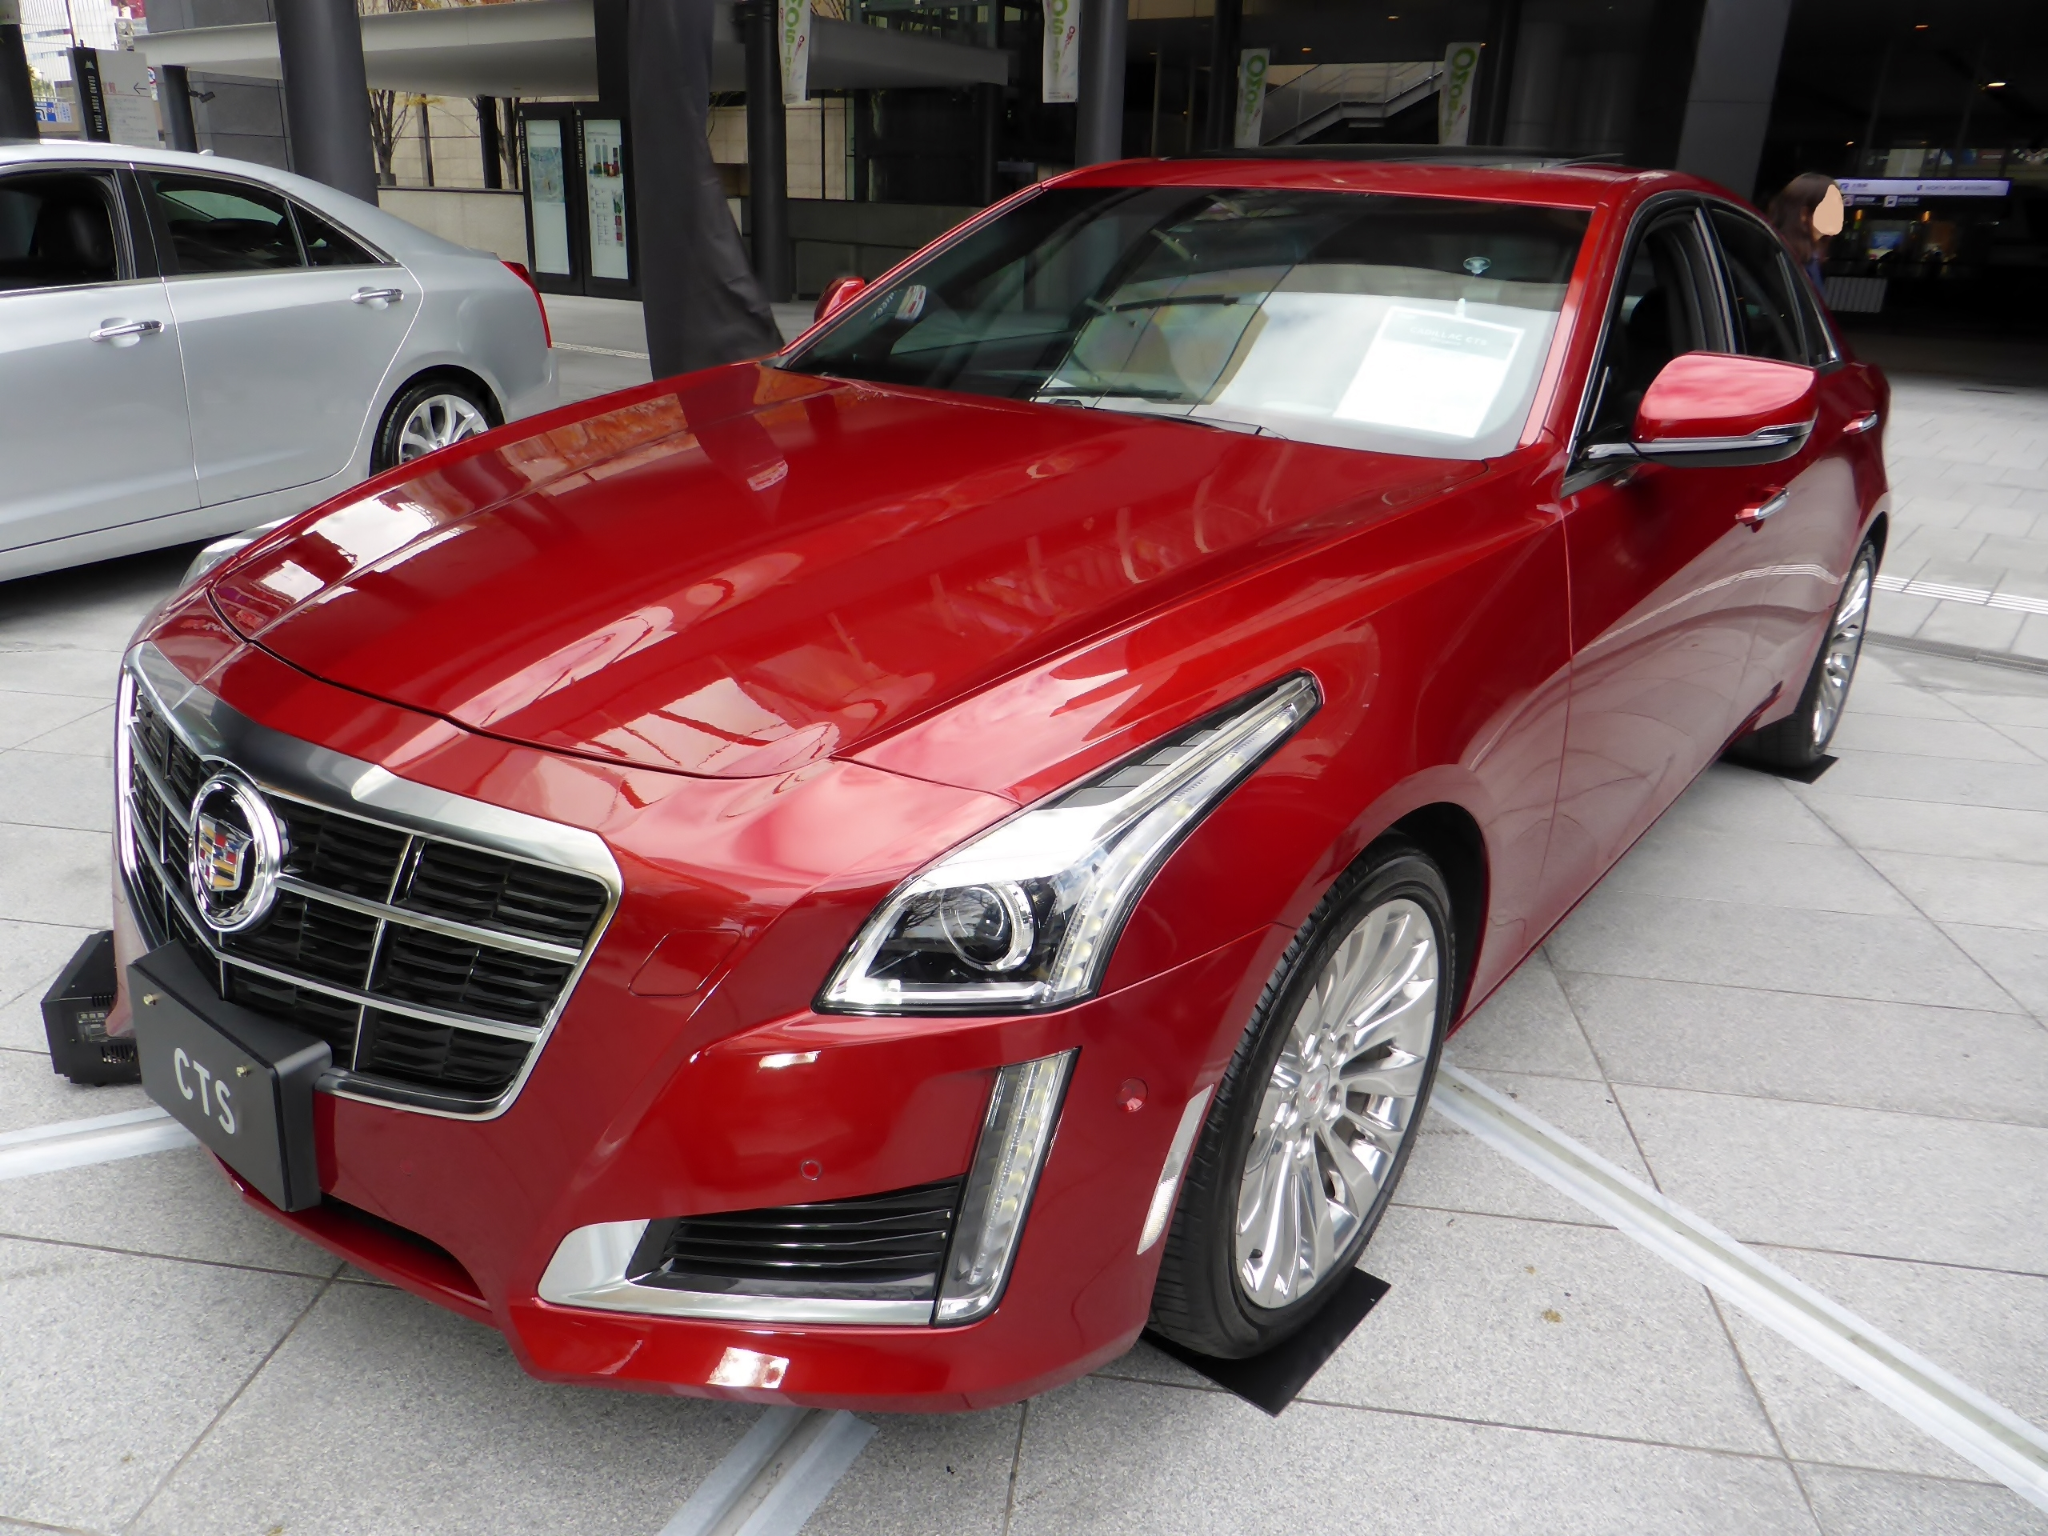 Red Cadillac CTS Outside a Building